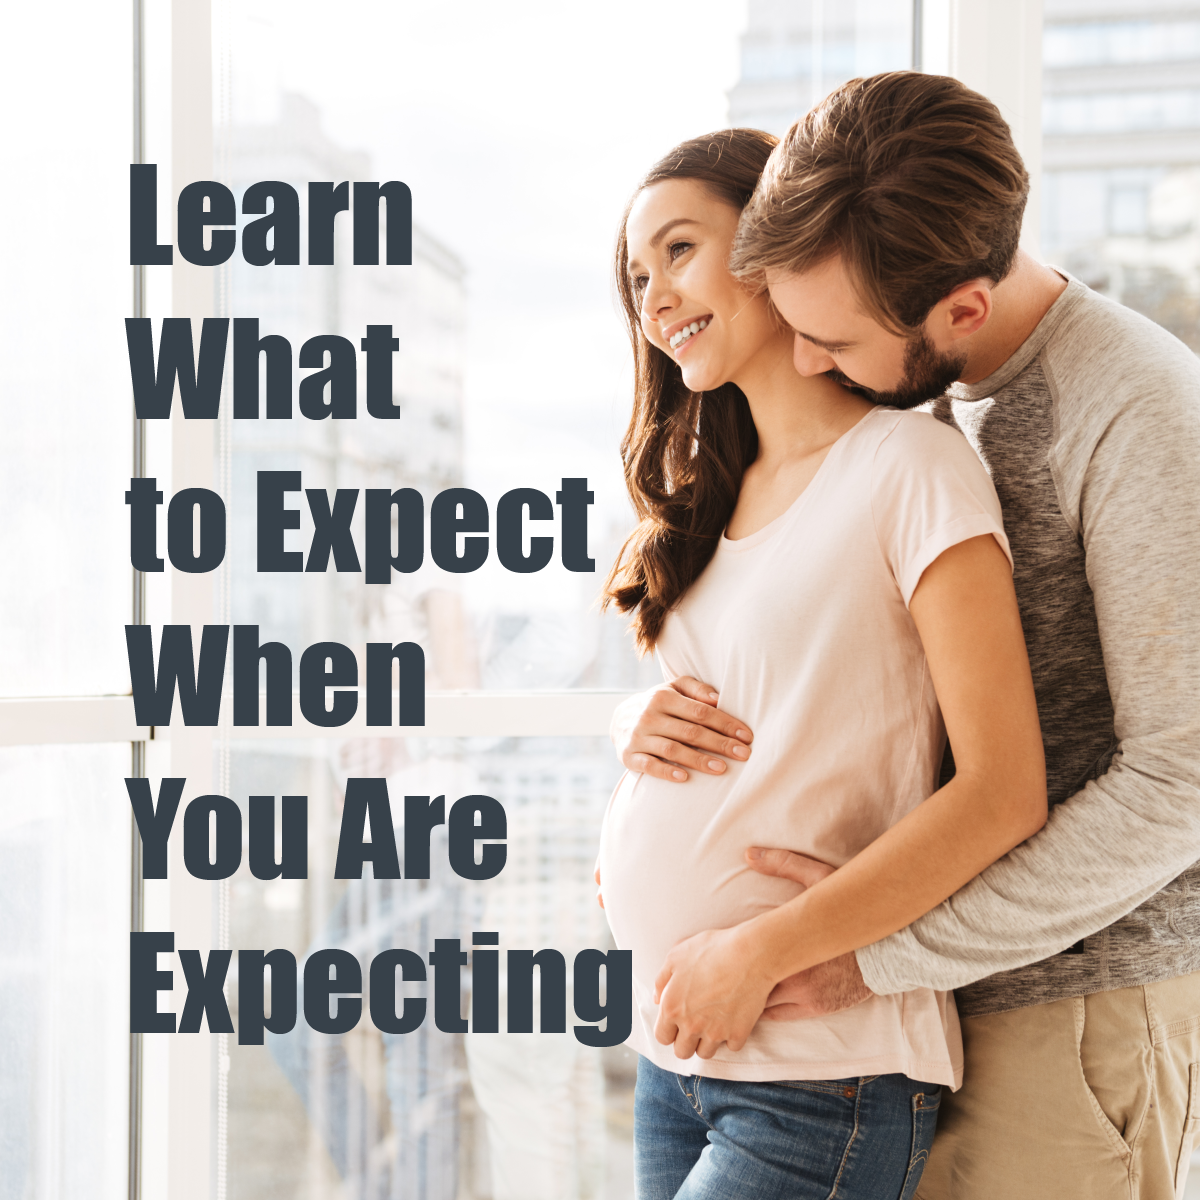 Learn what to expect when you are expecting.